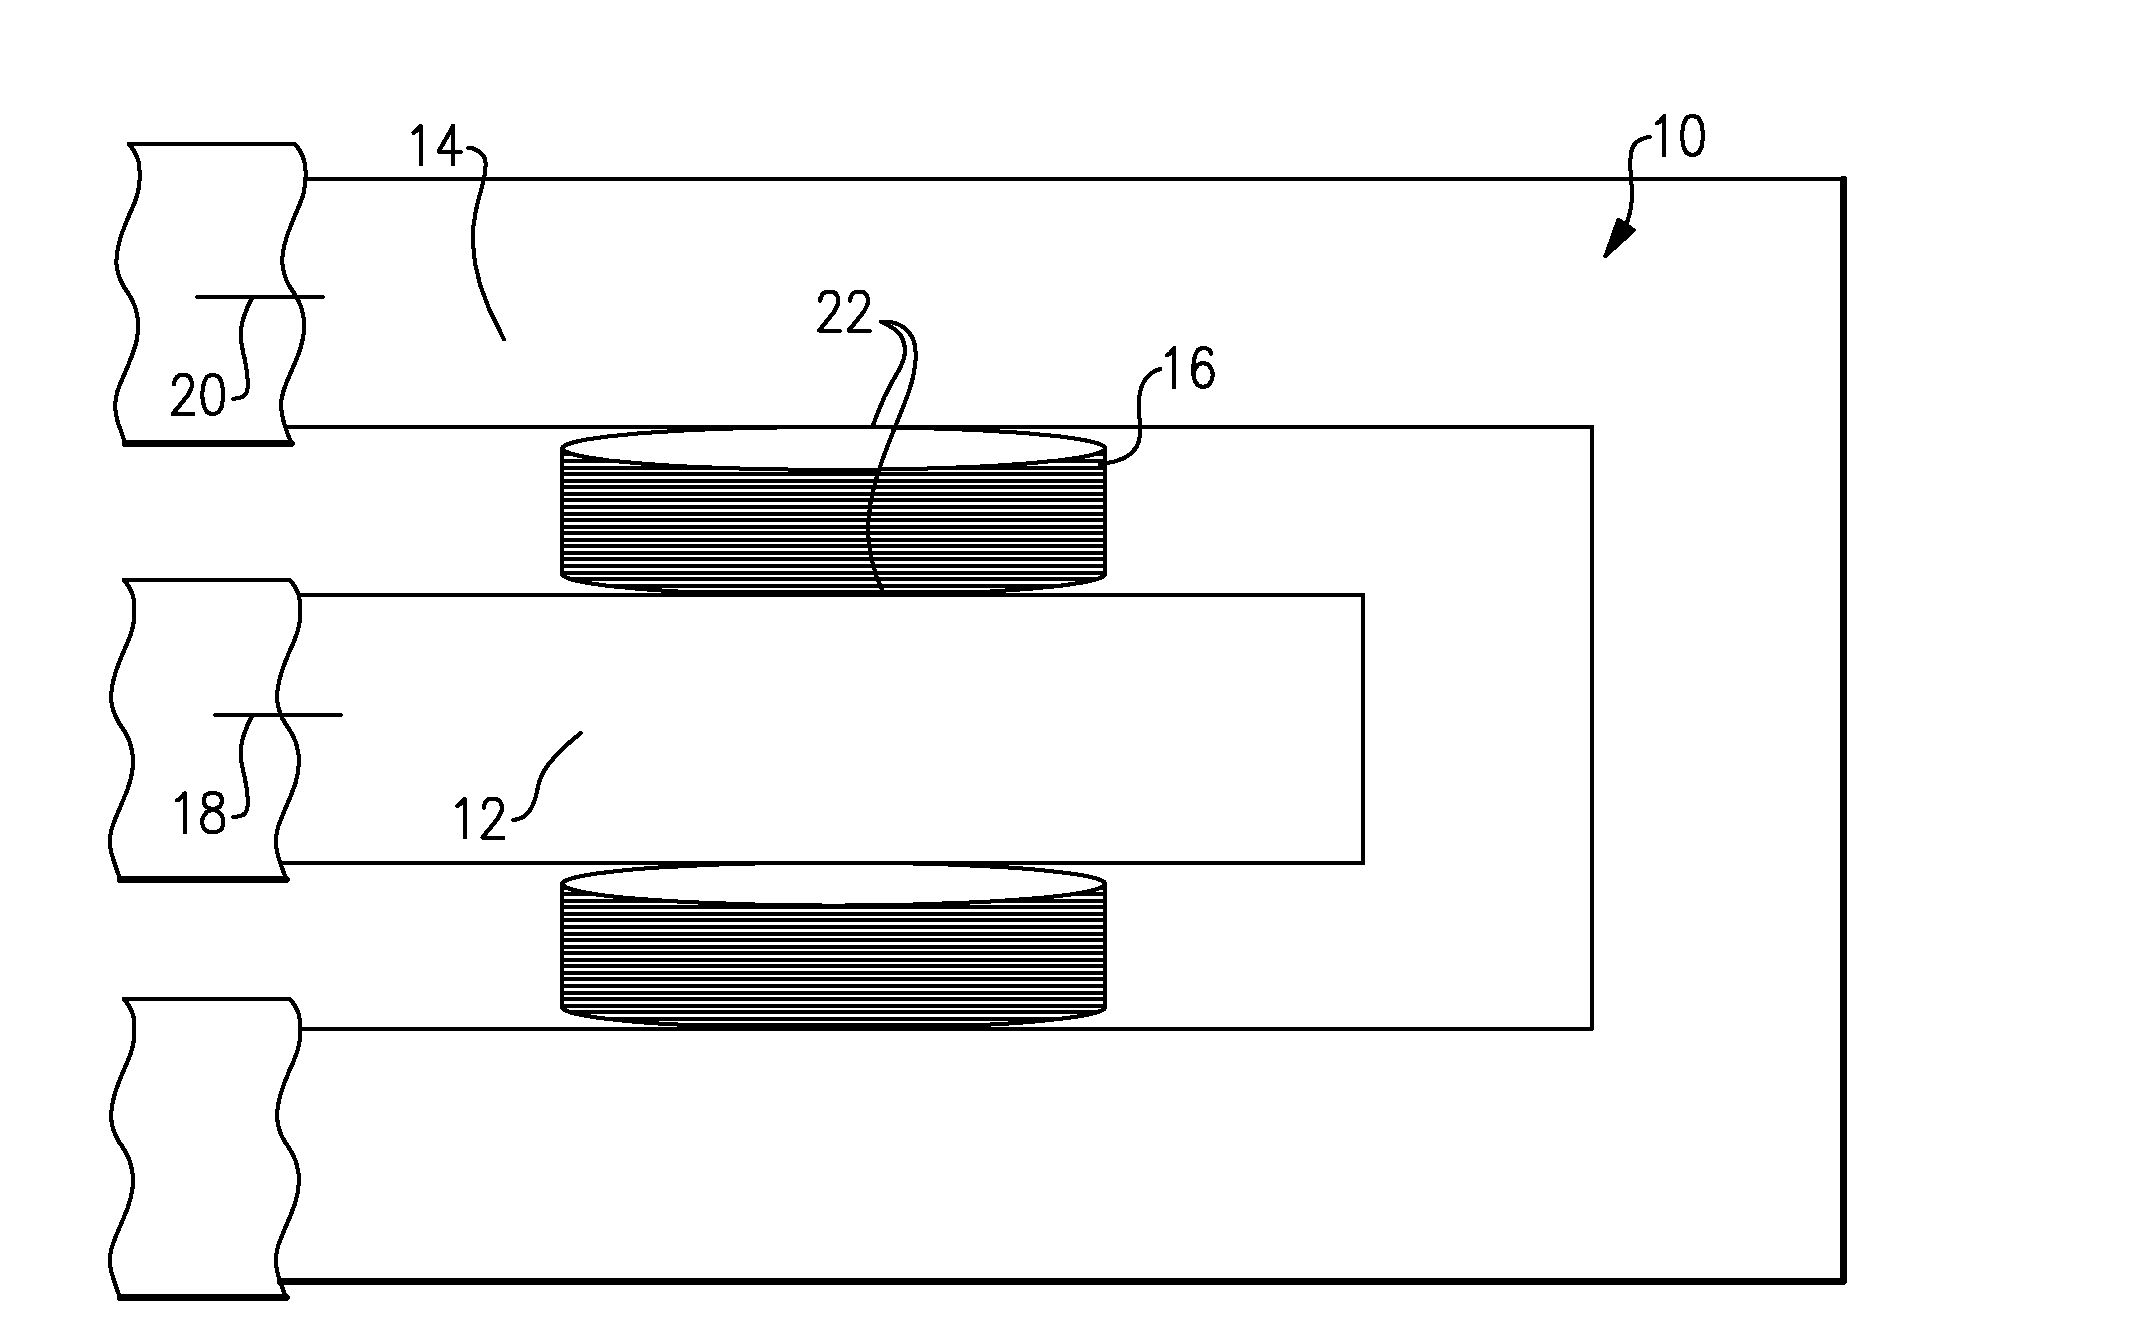 Thermal management system with graphene-based thermal interface material